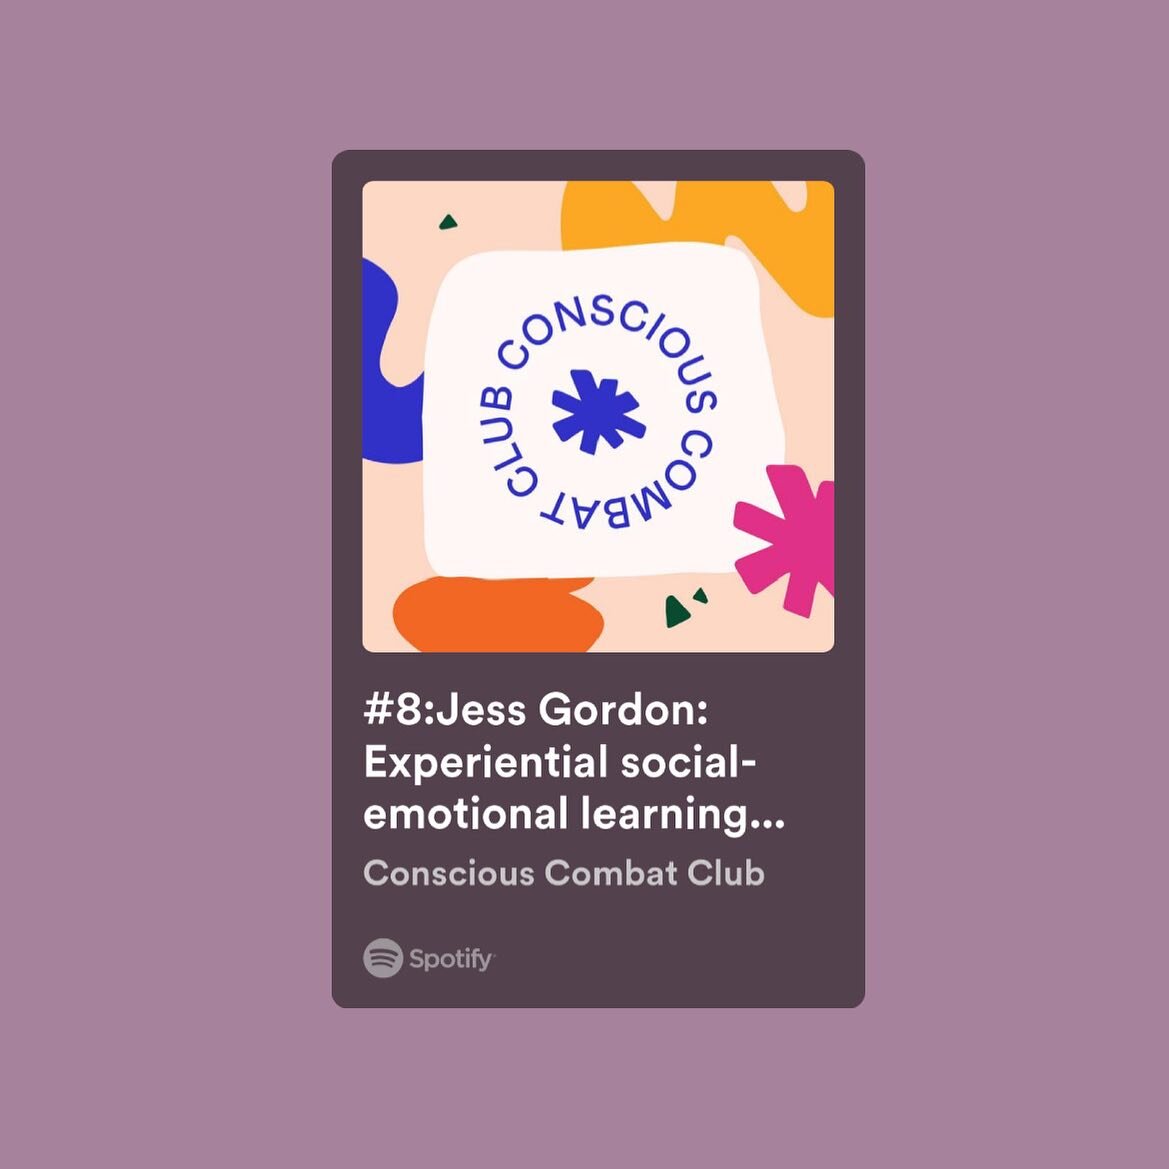 Excited to share my podcast interview with Georgia at @consciouscombat.club 🎙️ We dive deep into topics close to my heart: self-defense, empowerment, Women Empowered, and the importance of social-emotional learning in schools for children and youth.